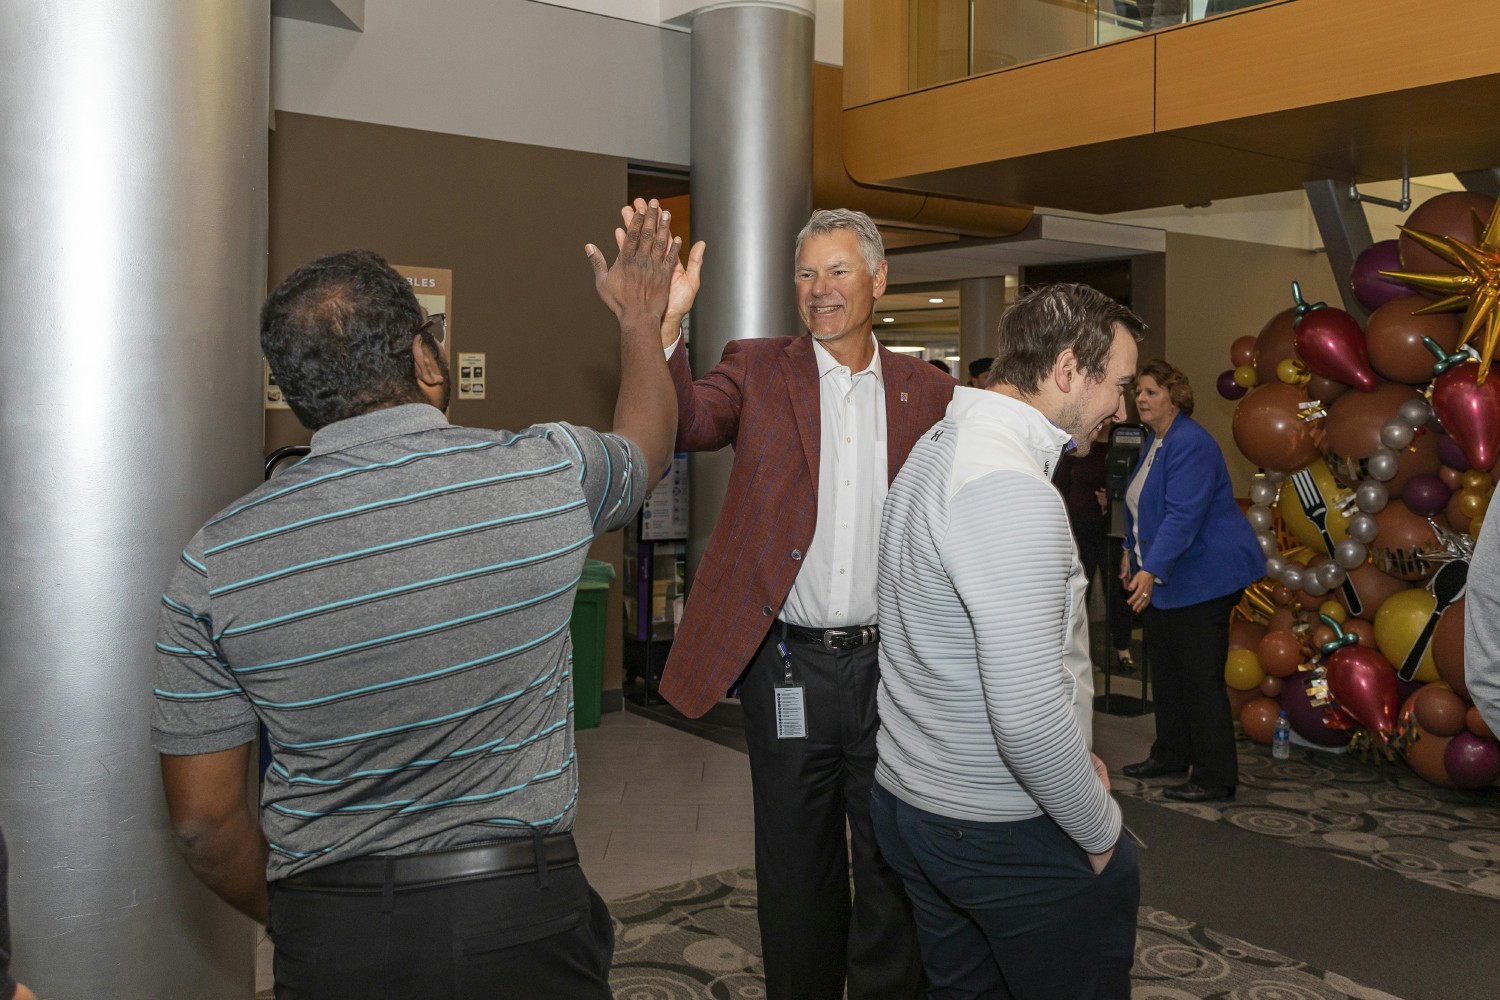 CEO Ray Kowalik greets employees at our annual new year kickoff event, Chili Bowl. 